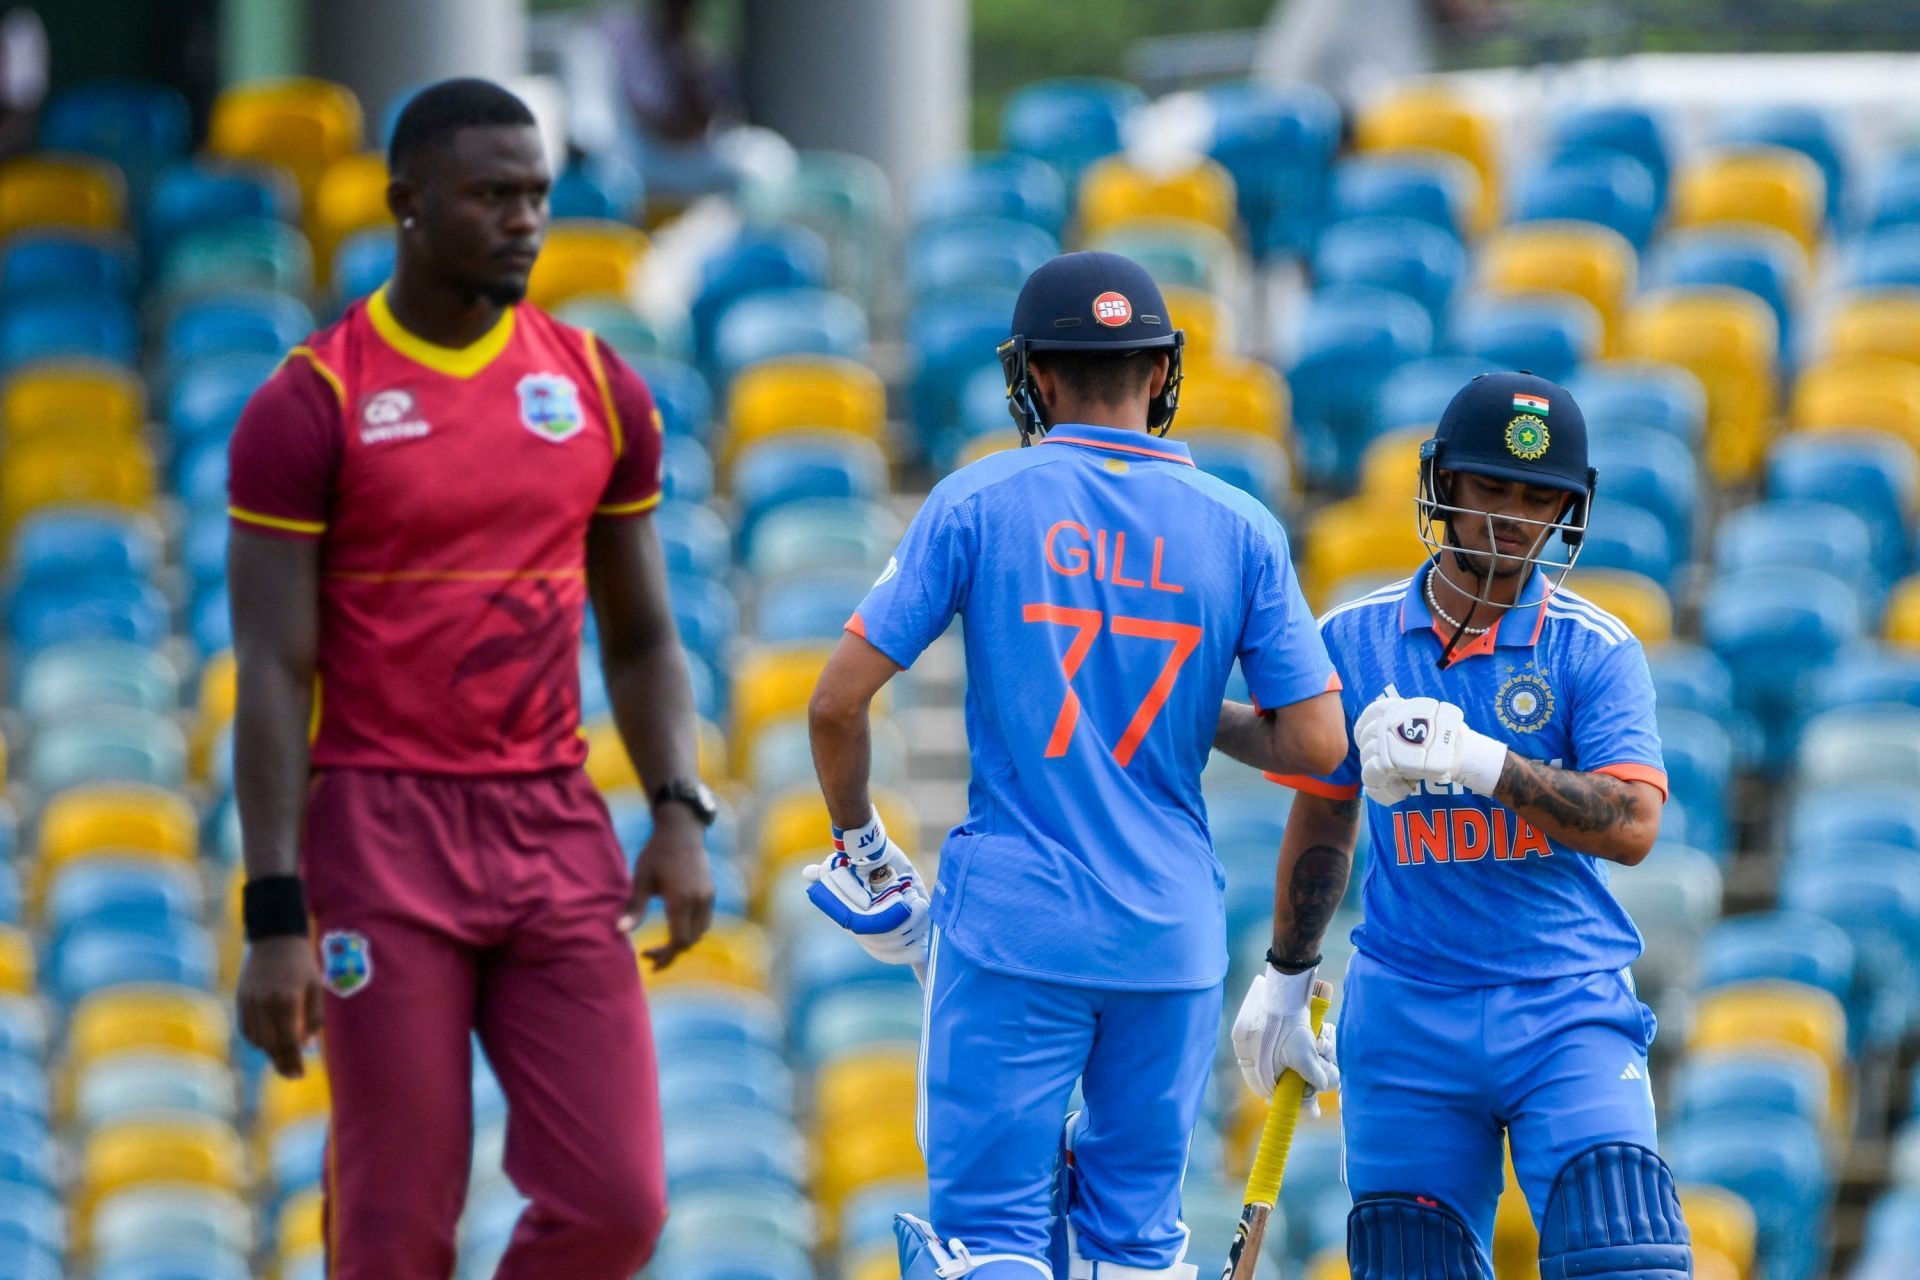 Shubman Gill [left] has notched up three single-digit scores in the series so far